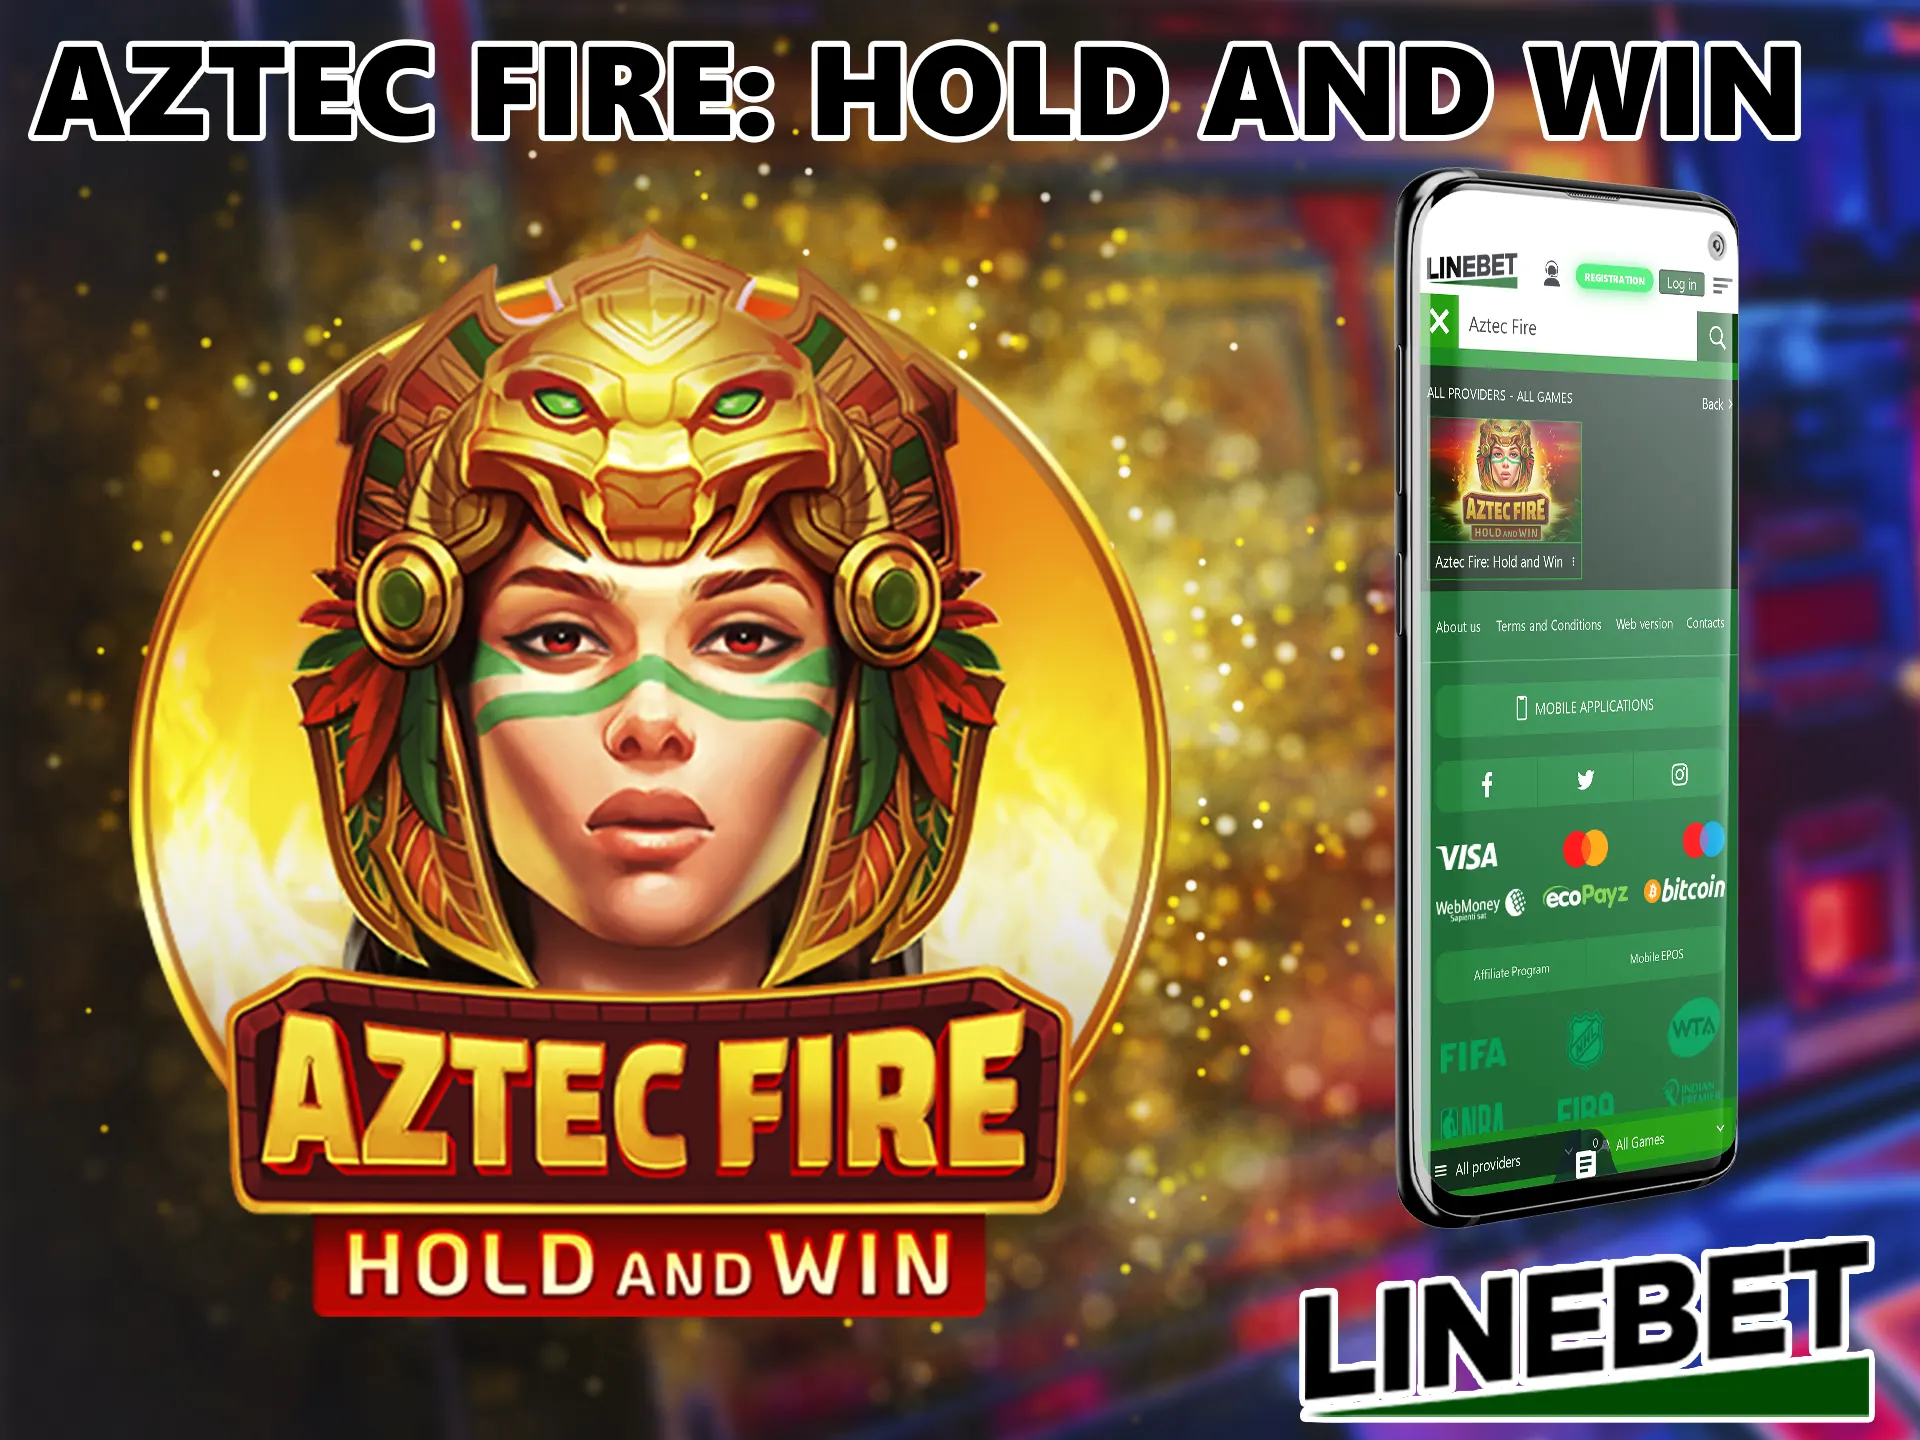 An Aztec story is the core plot of this game, 5 reels and a 5x8 layout, and generous bonuses with free spins await you at Linebet.